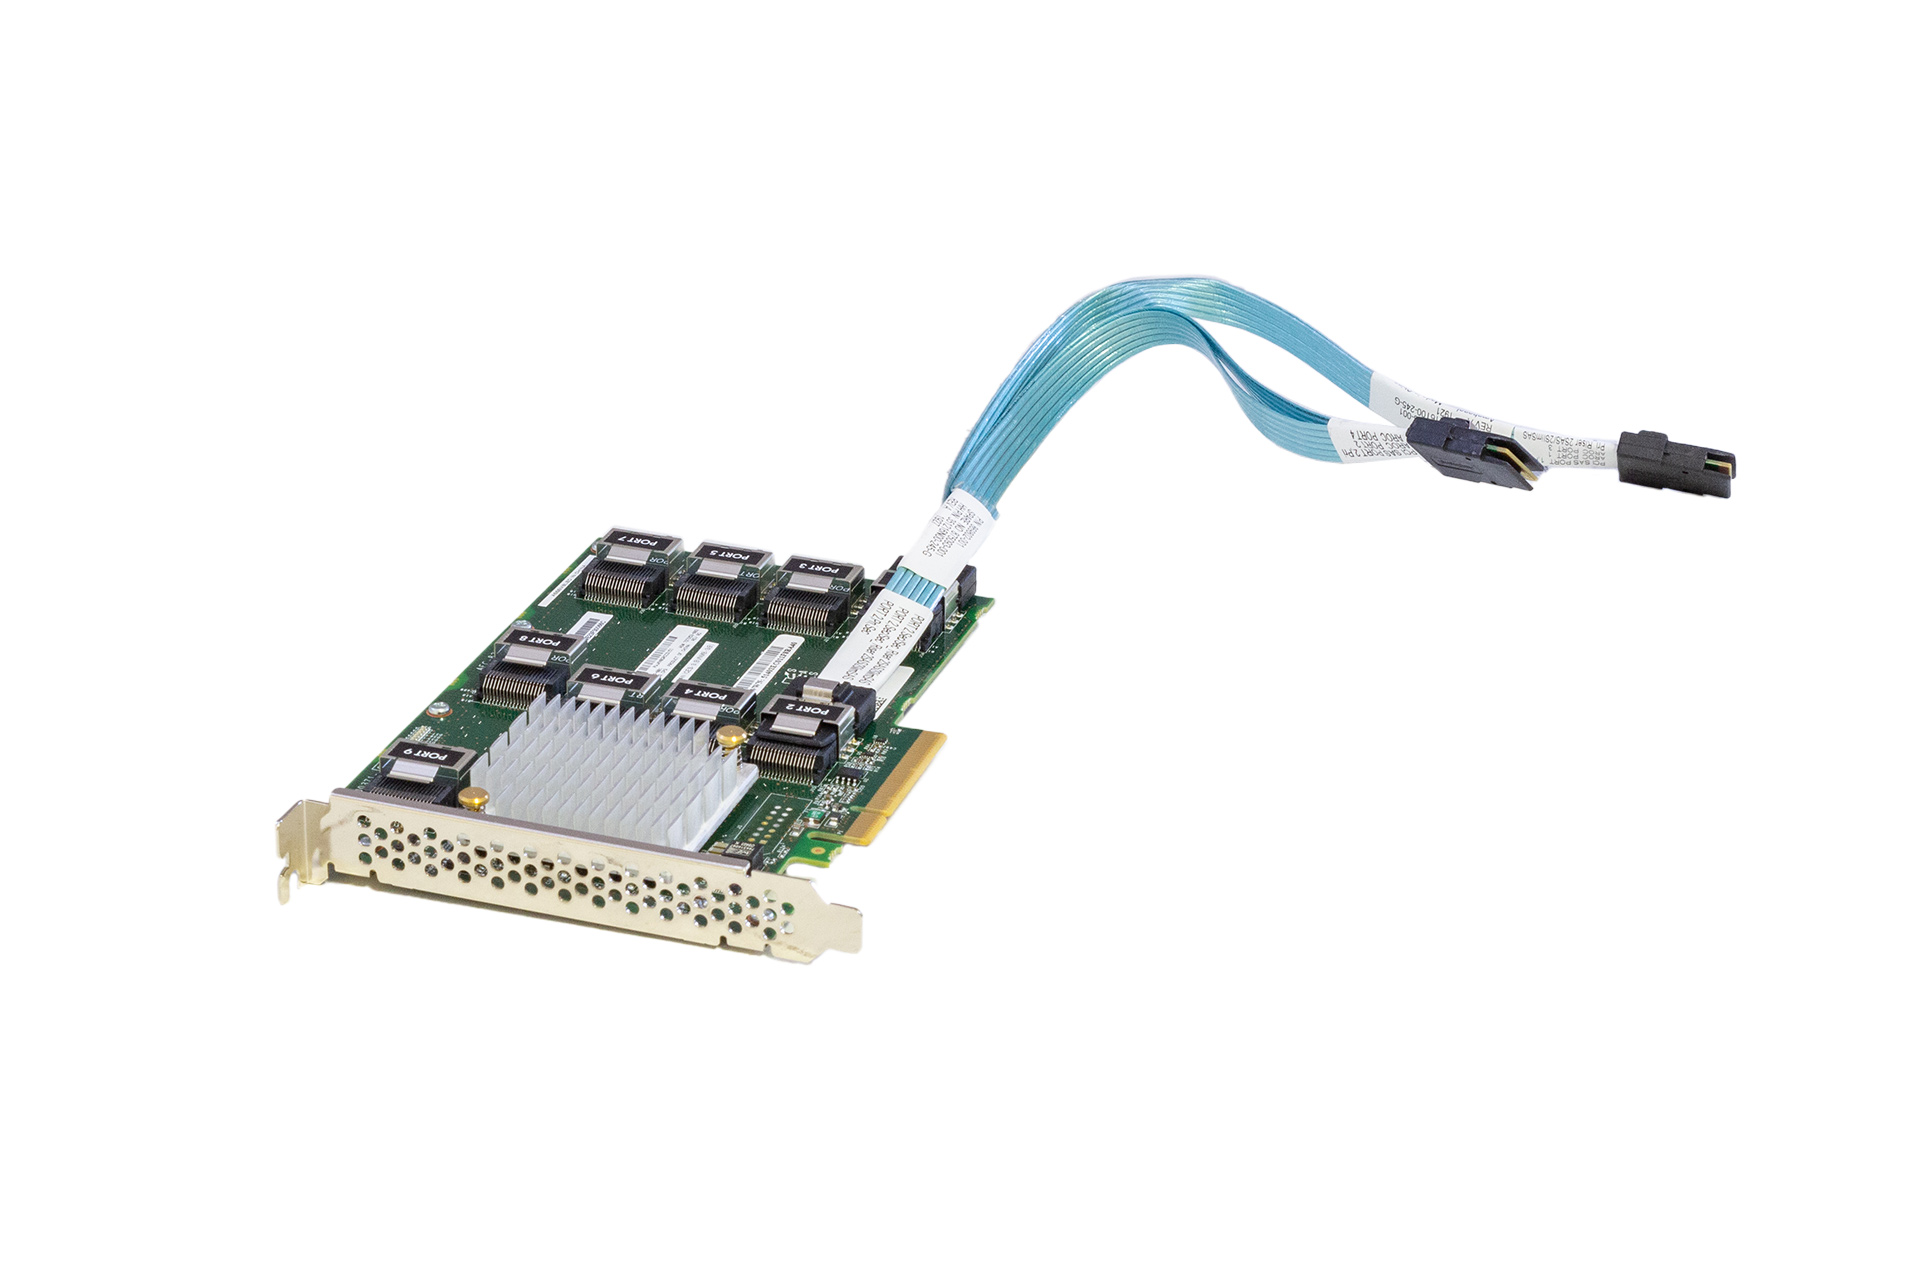 HPE SAS Expander Card 12G for DL380 Gen10 with cables